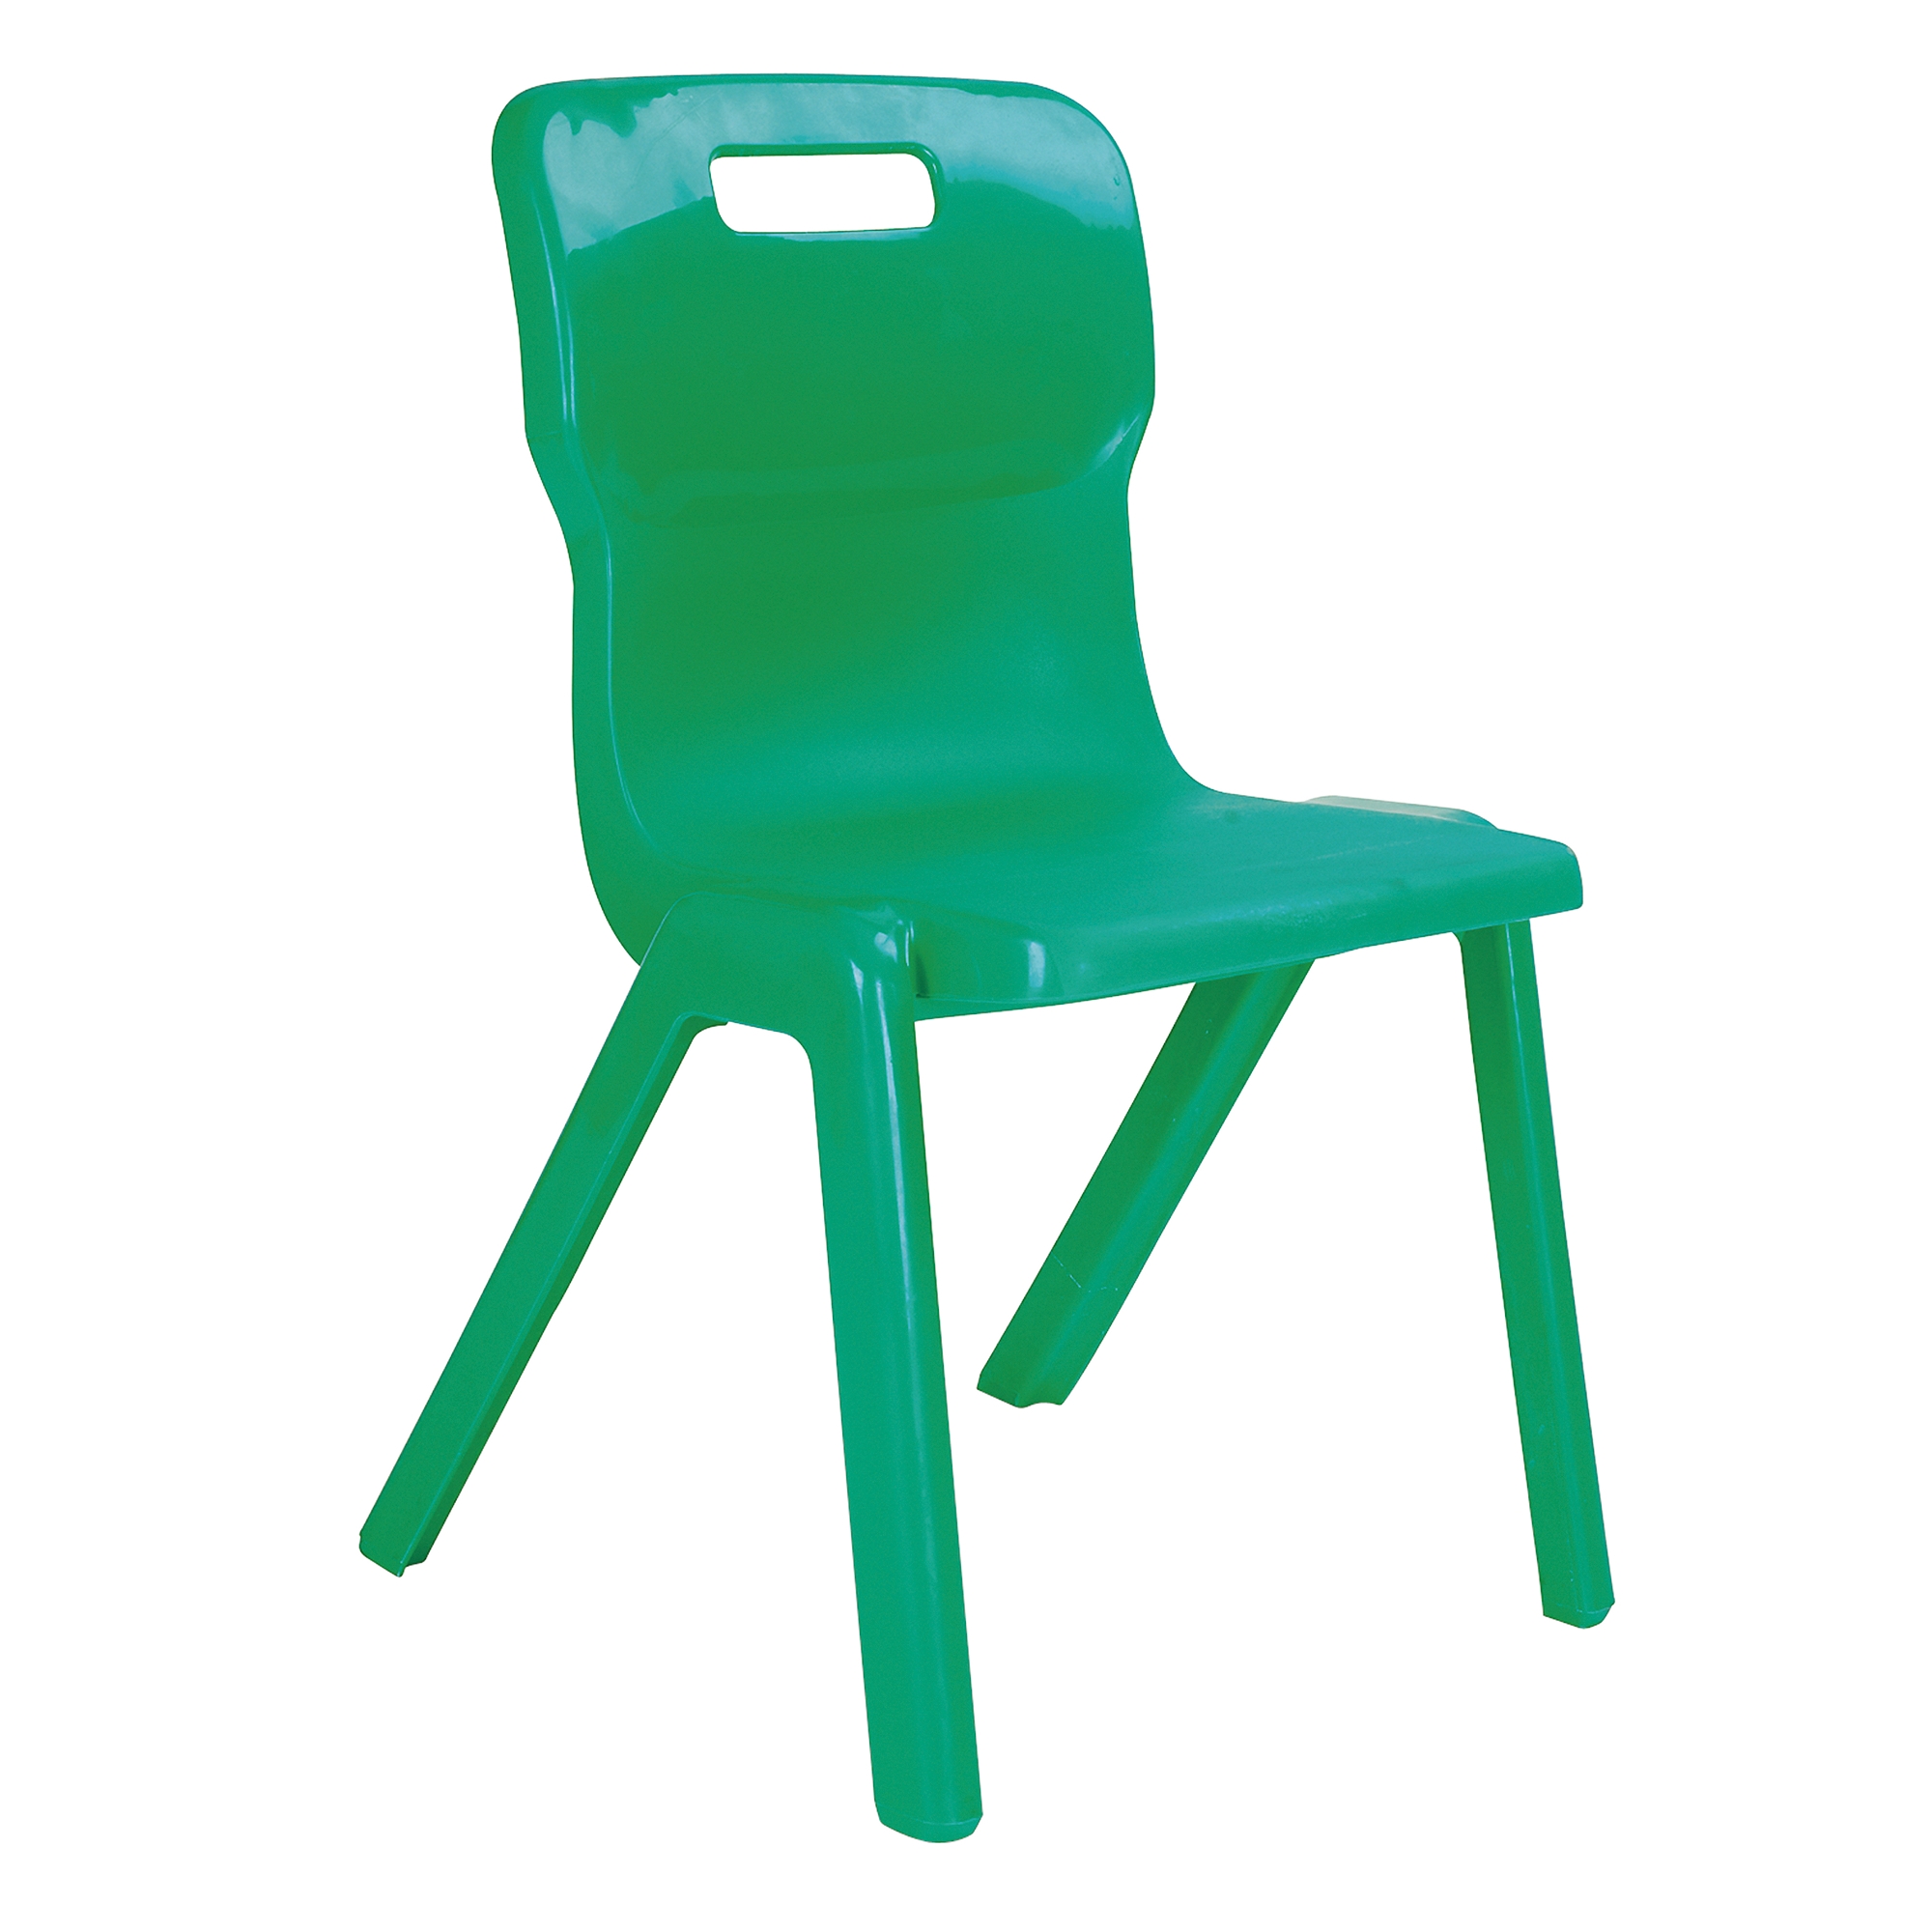 One Piece Titan Chair - Size 2 Ages 4-6 Green